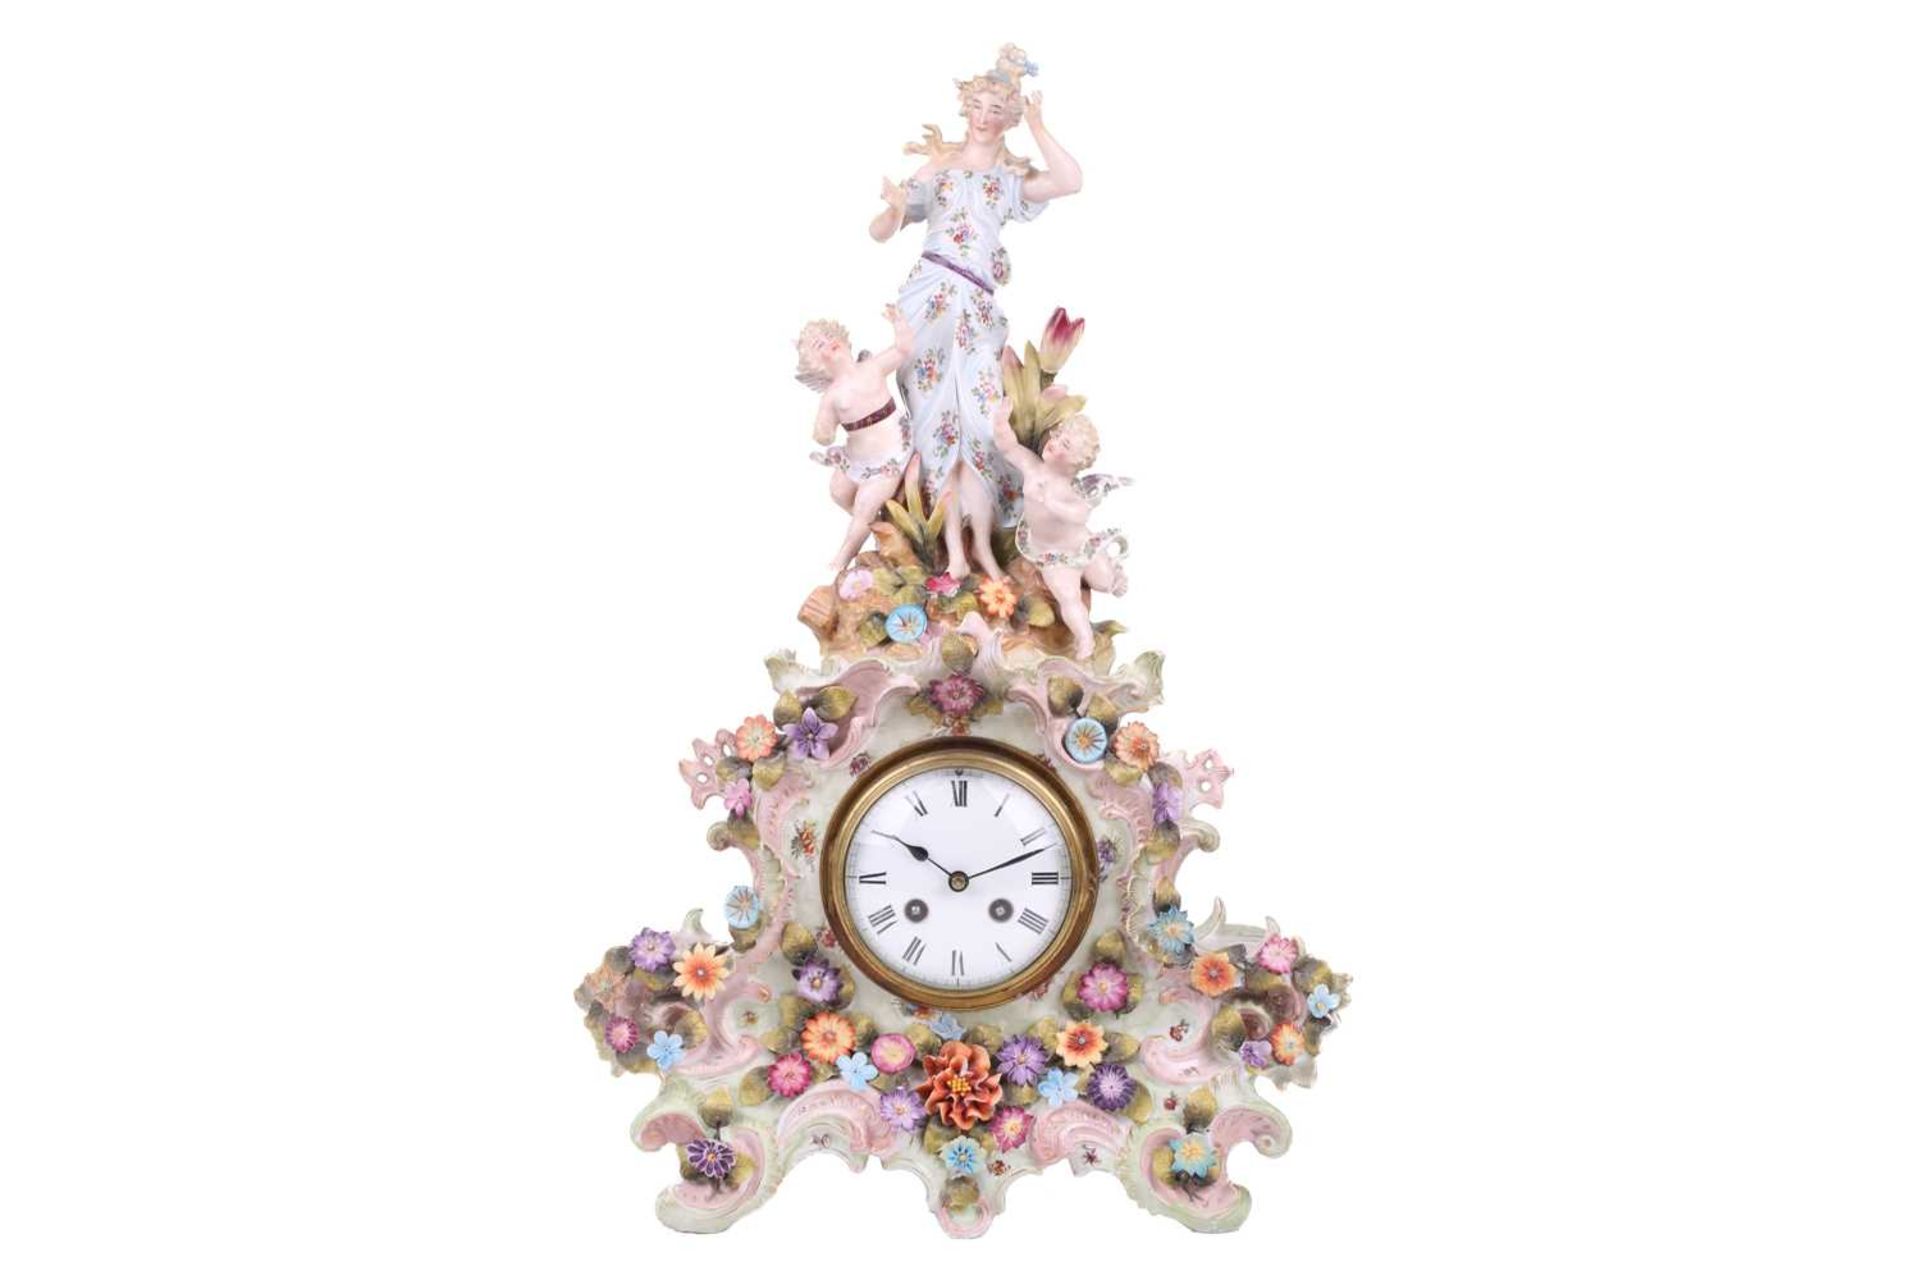 A late 19th-century German Porcelain figural 8-day mantel clock with cherubic and muse surmount